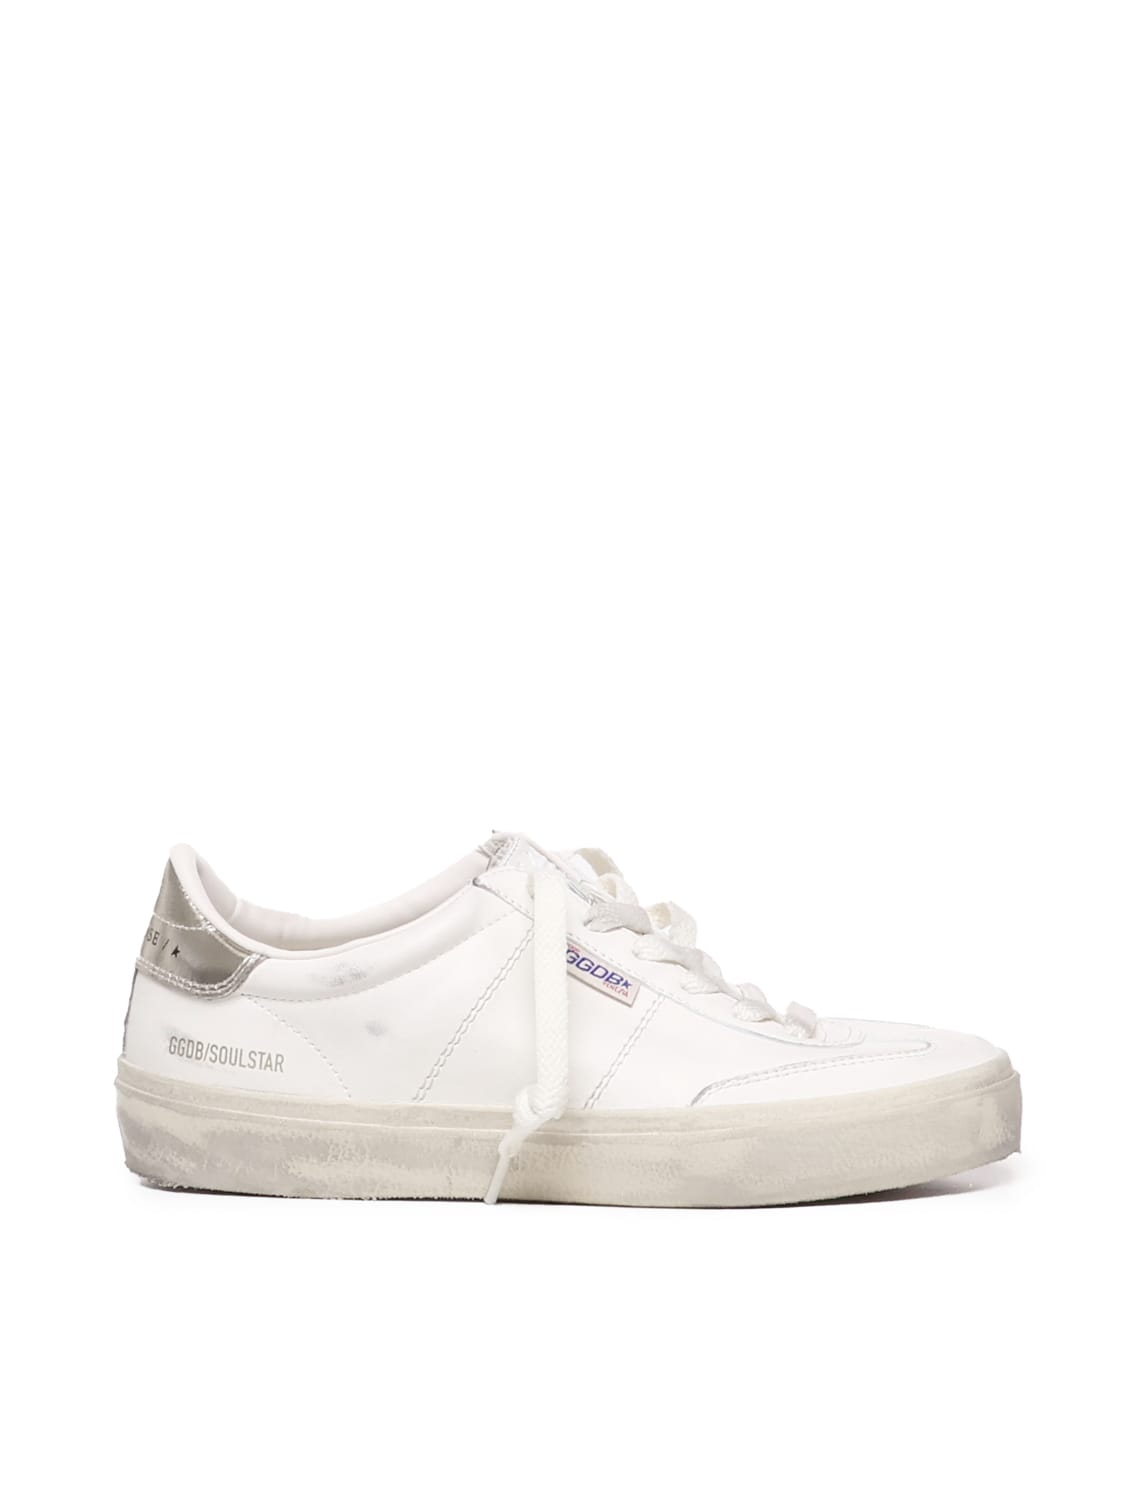 Golden Goose Soul Star Leather Sneakers